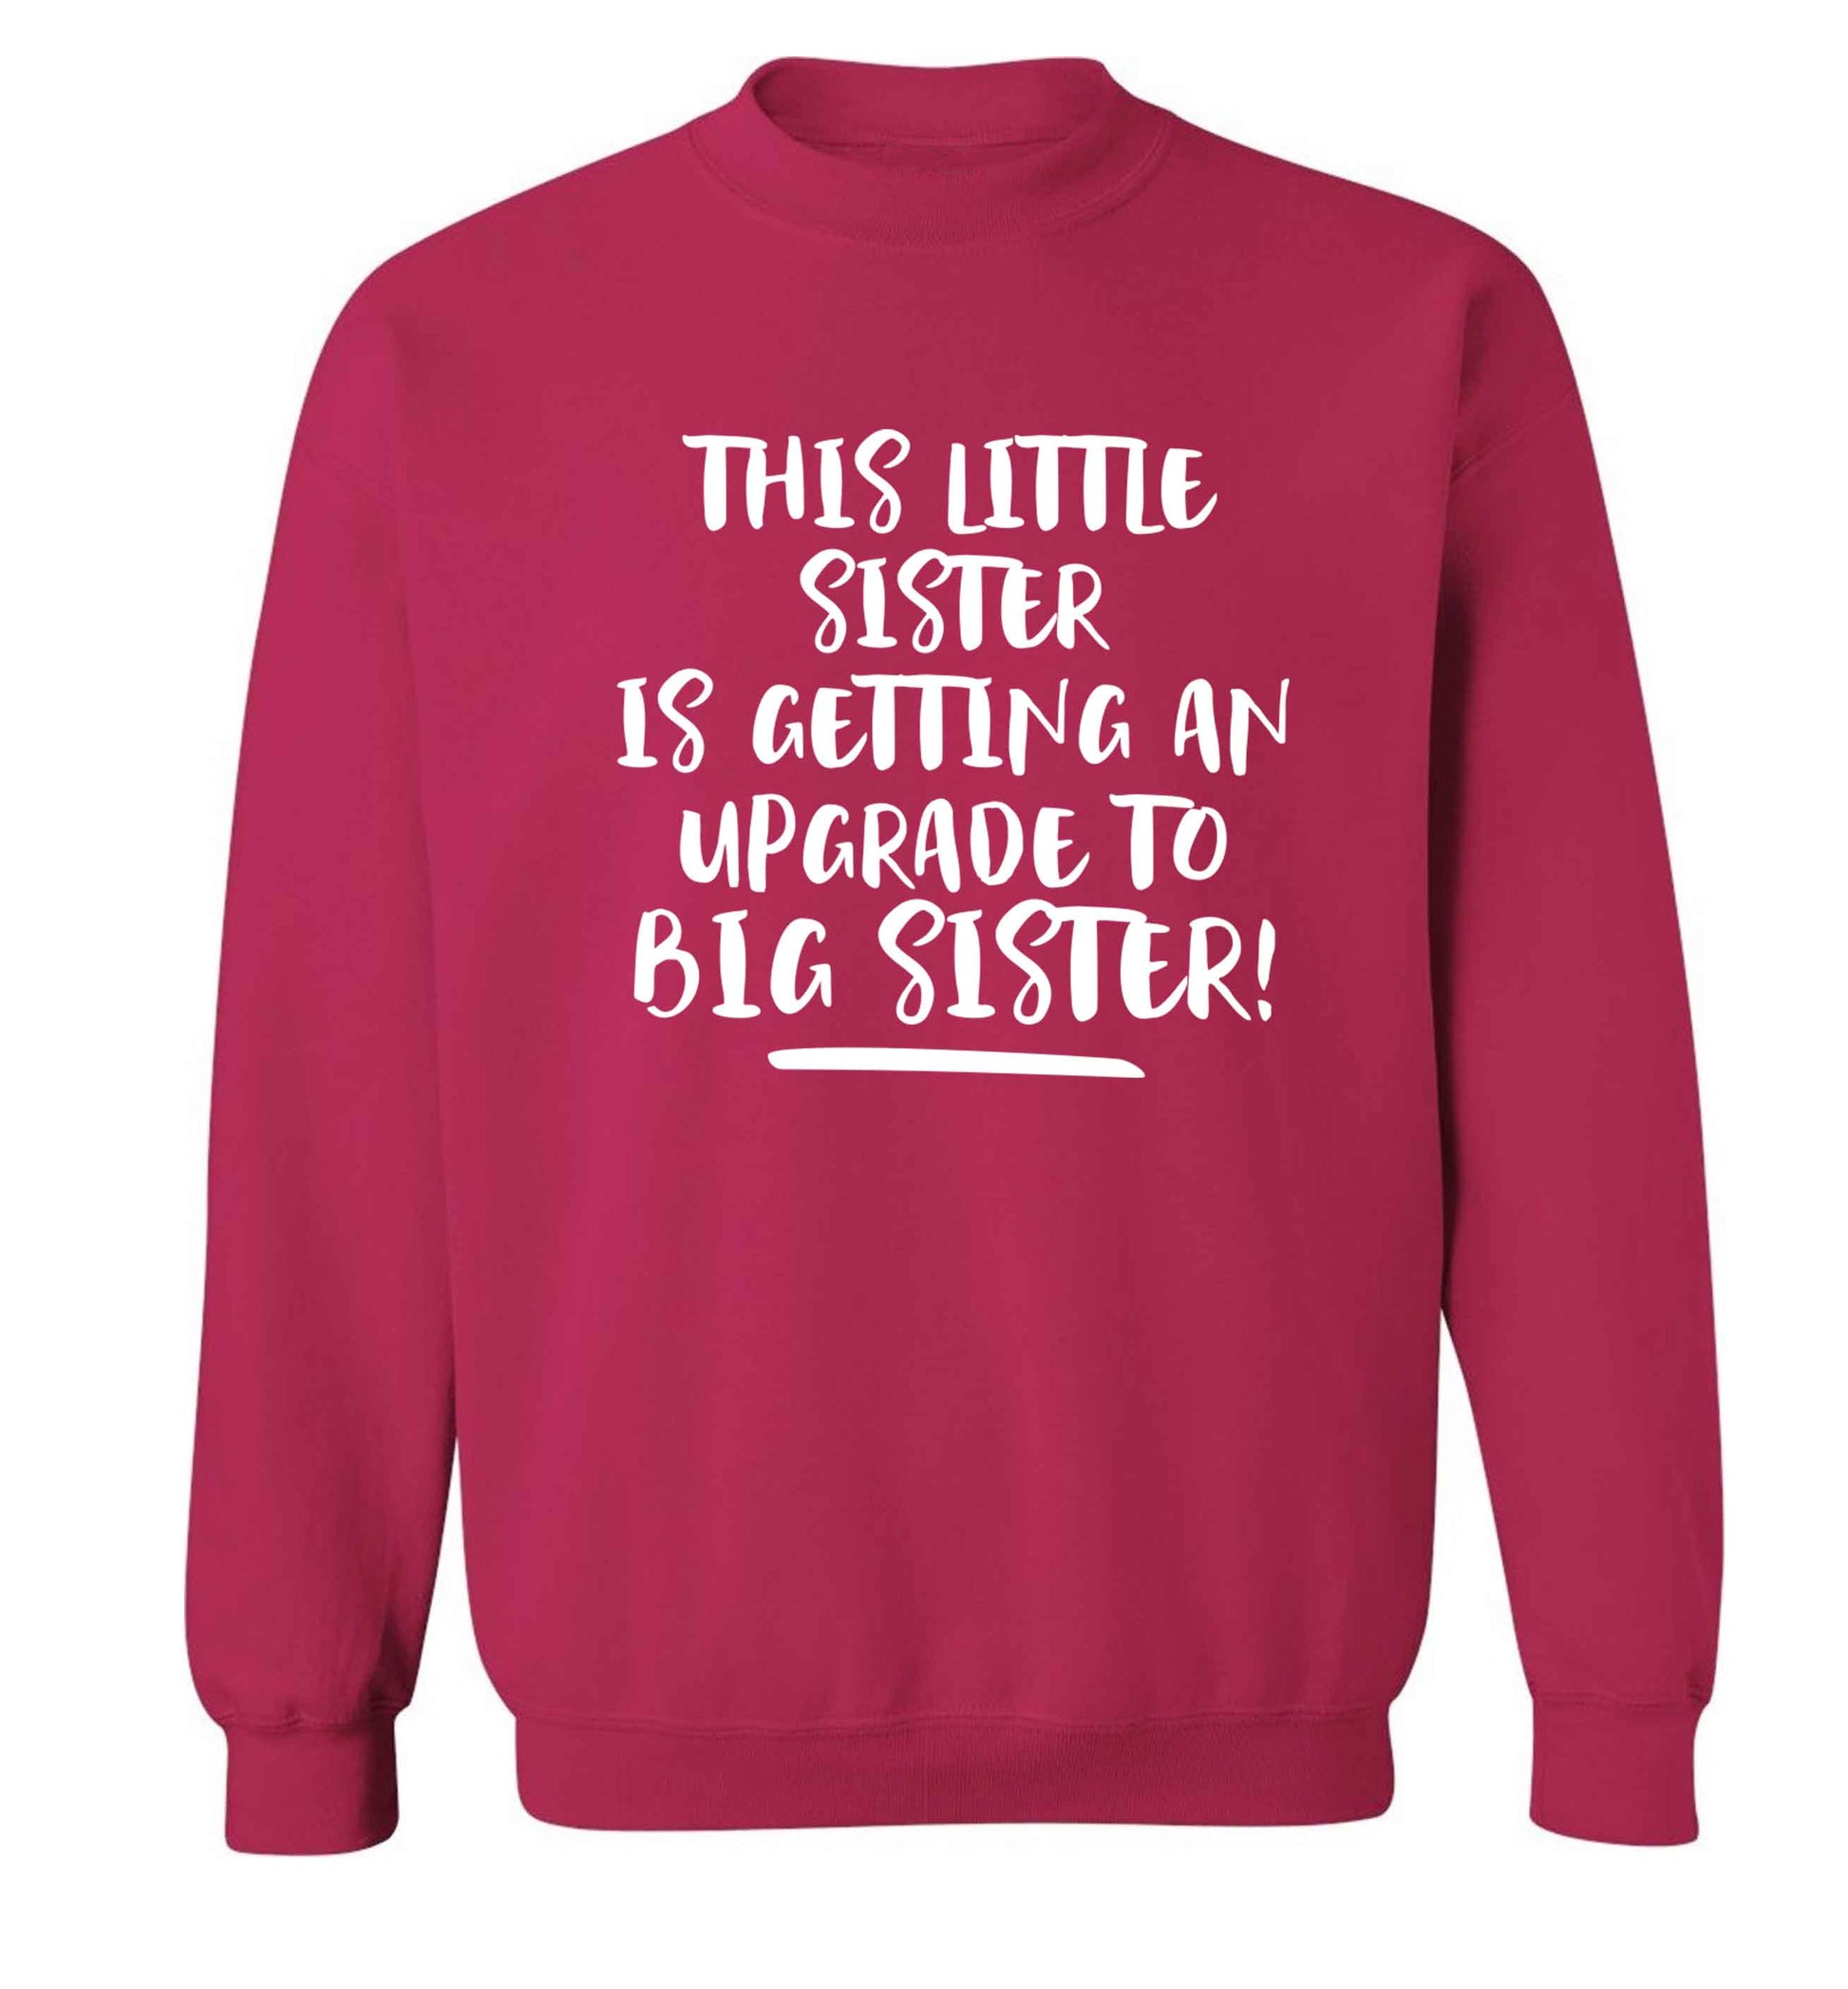 This little sister is getting an upgrade to big sister! Adult's unisex pink Sweater 2XL